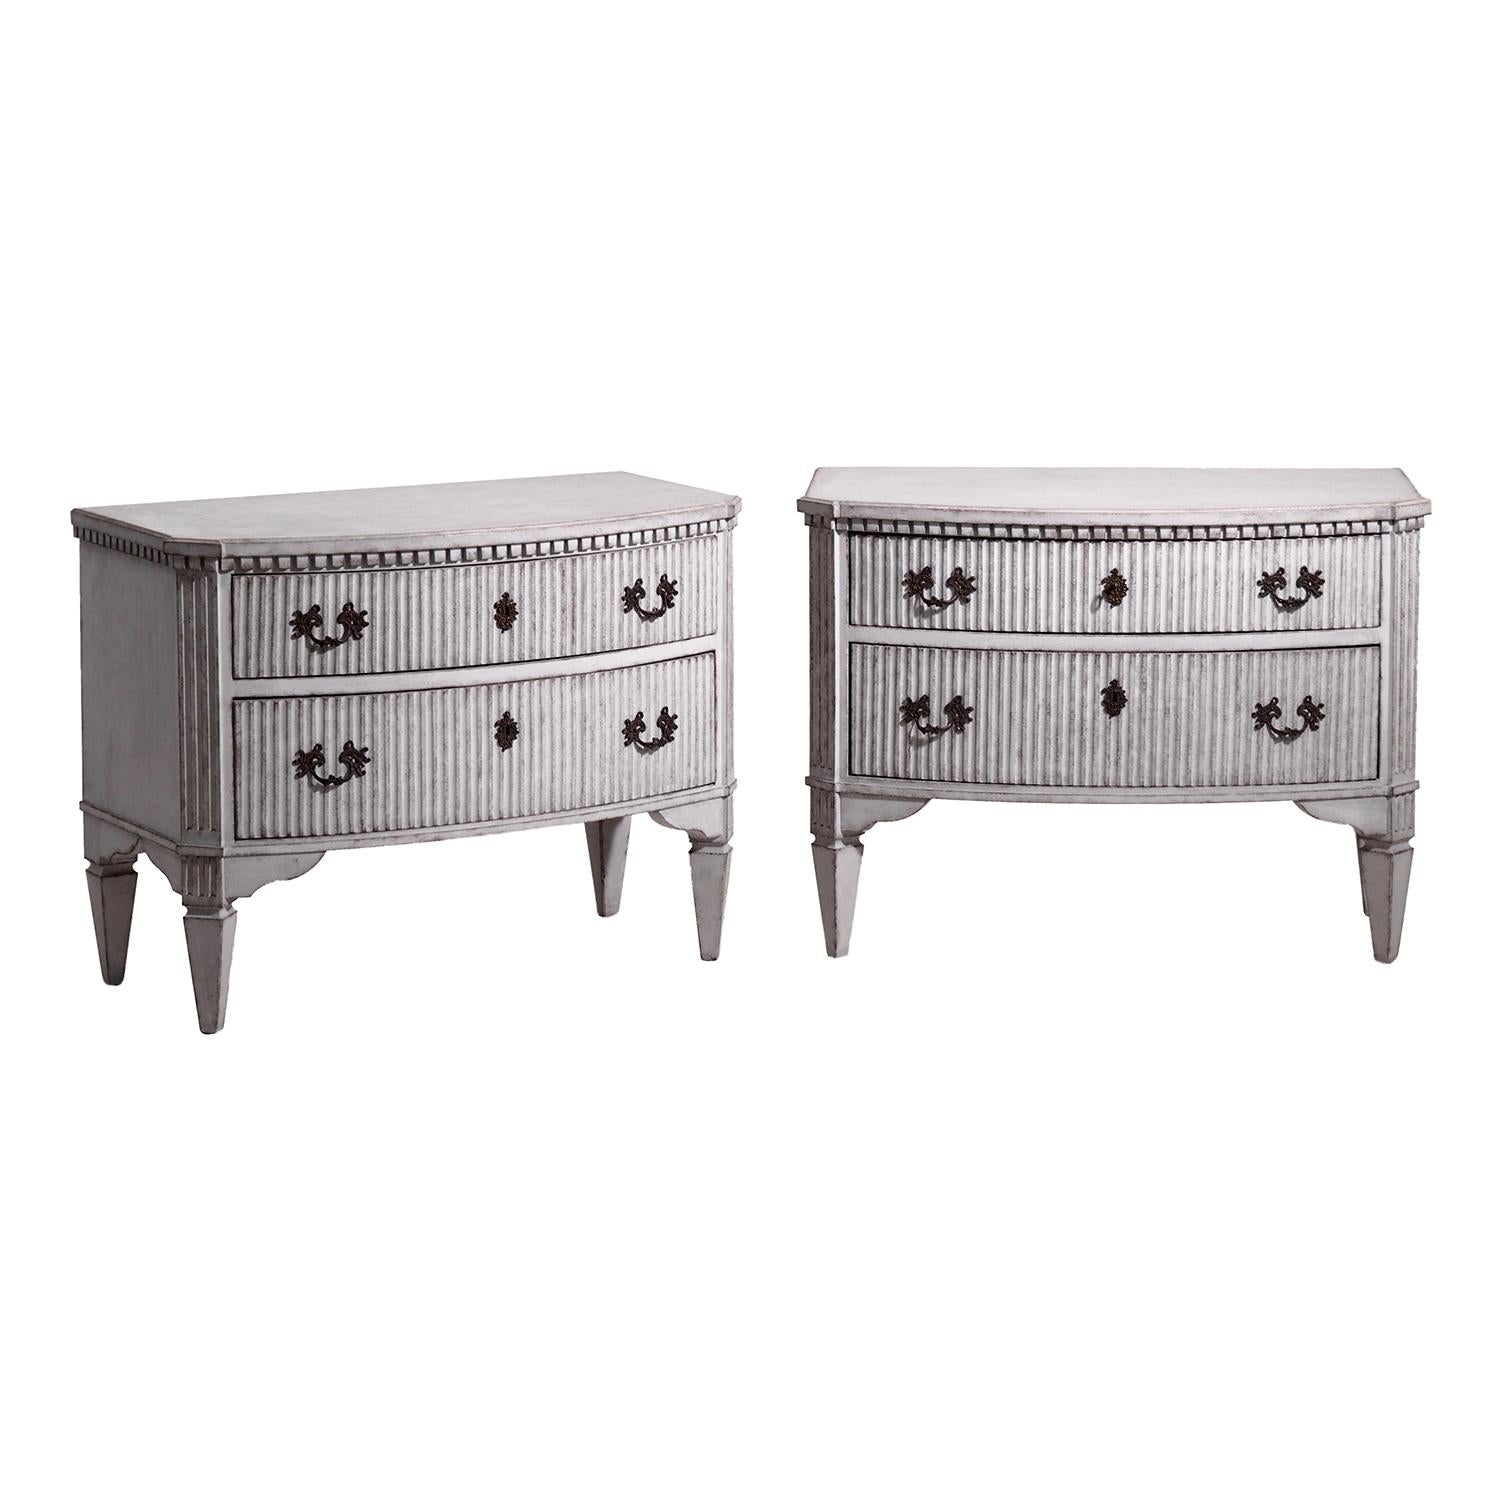 An antique Swedish Gustavian pair of grey chests made of hand carved Pinewood with two drawers, standing on four fluted carvings and tapered legs, in good condition. The commodes are detailed in the Neoclassical Greek style with their original